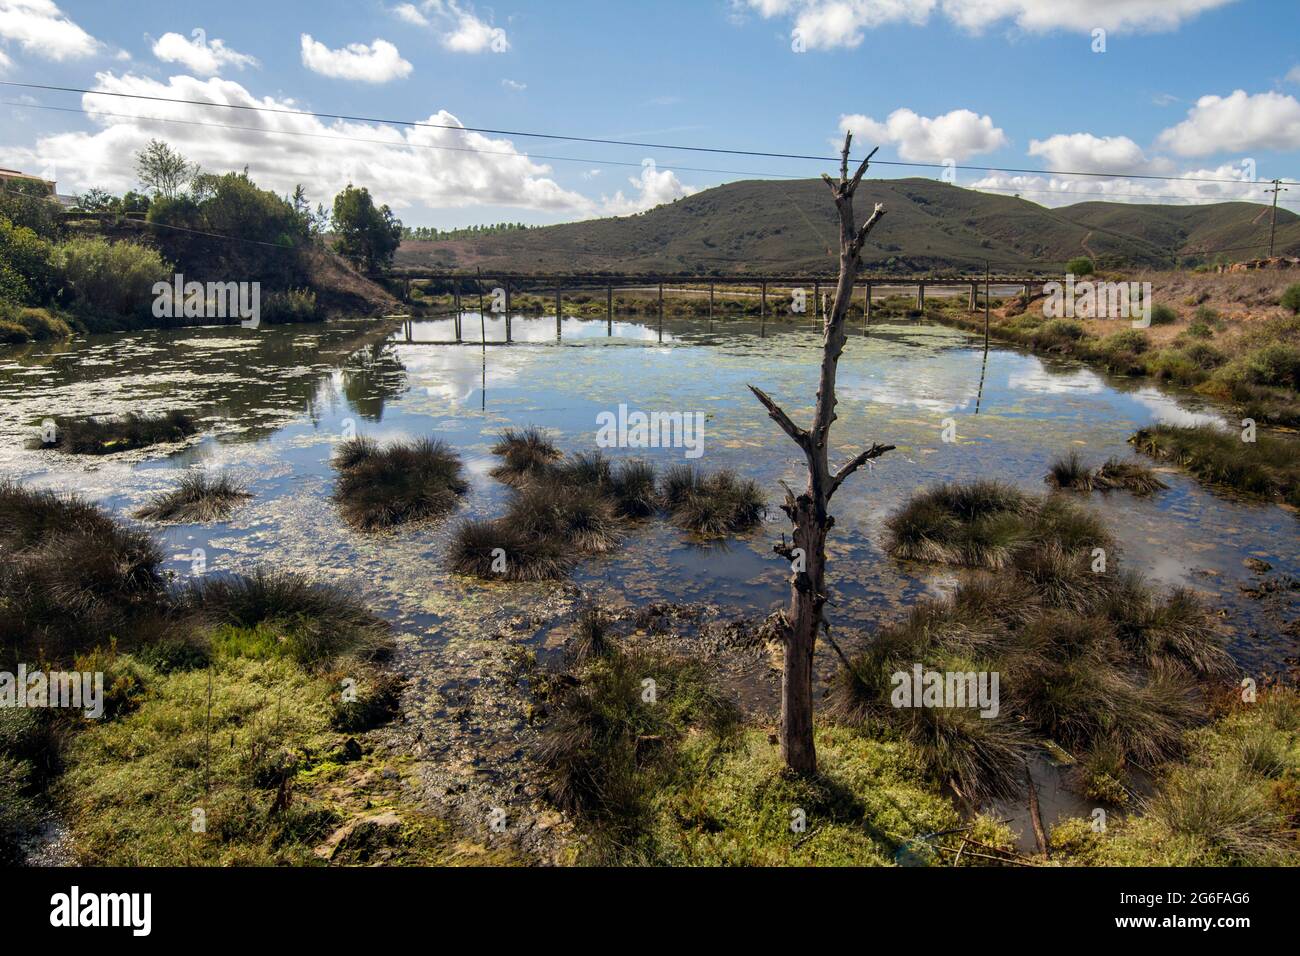 View of a water transportation pipe bridge on Portimao region, Portugal. Stock Photo